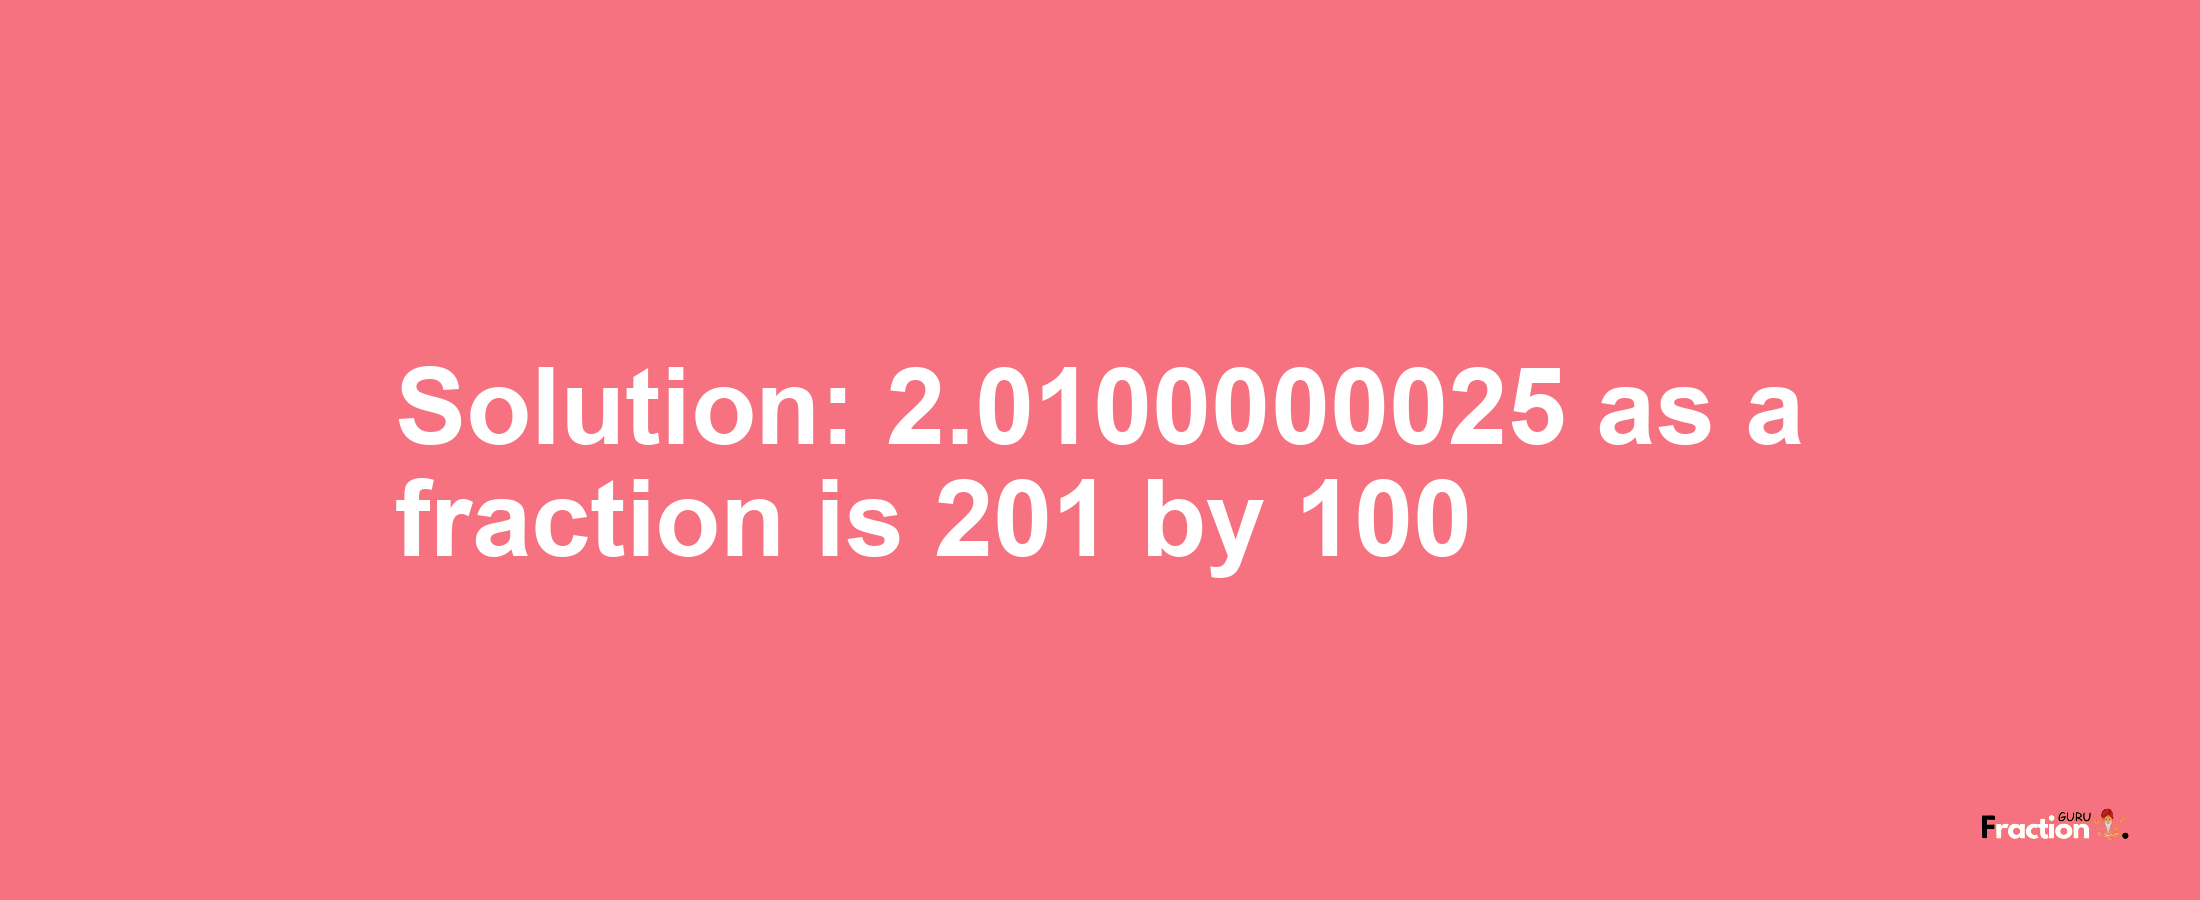 Solution:2.0100000025 as a fraction is 201/100